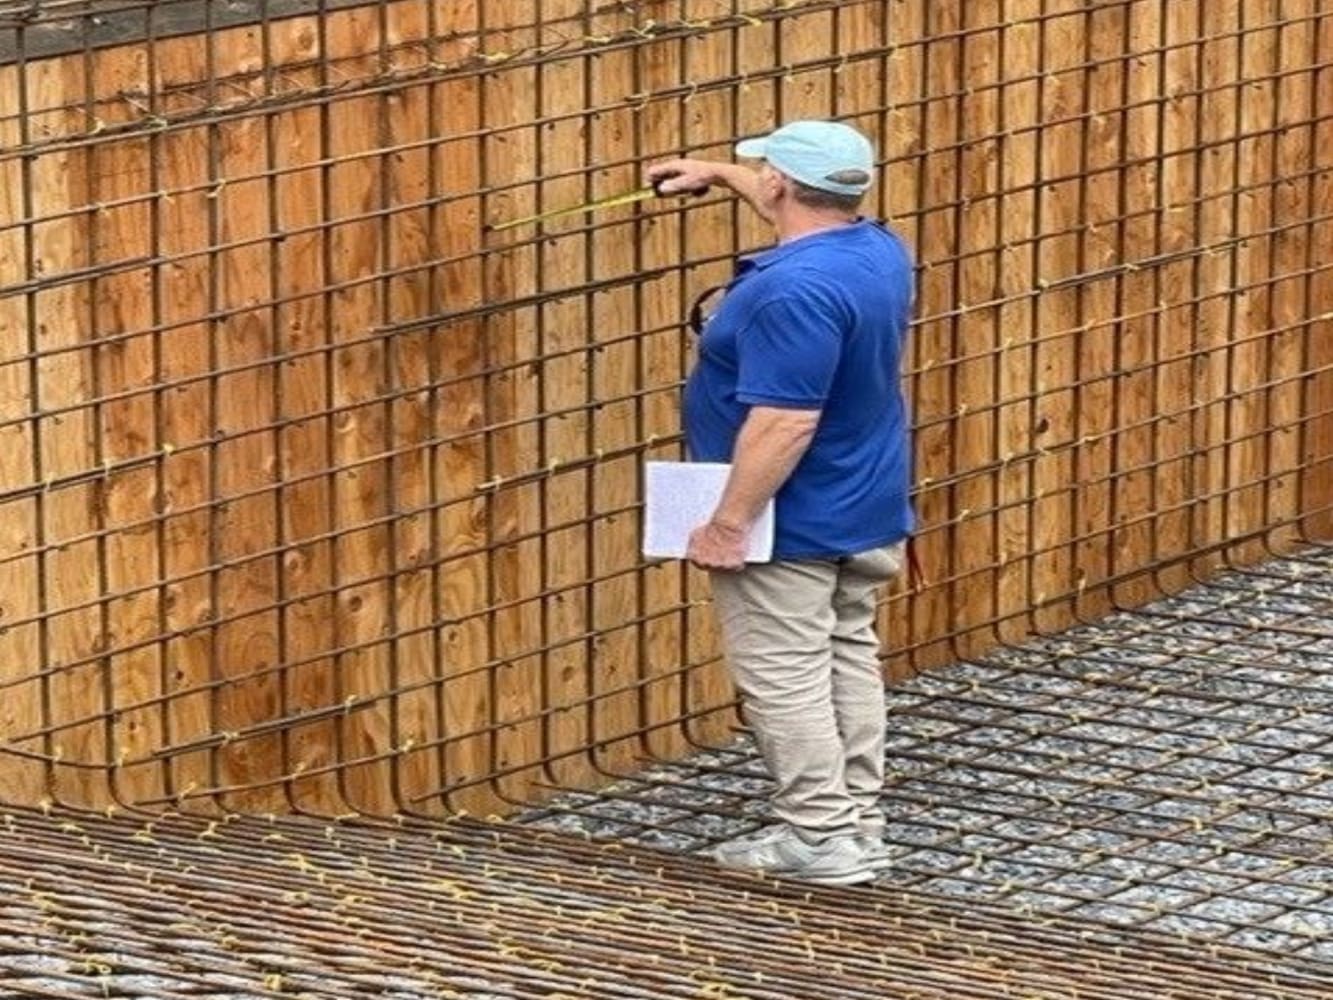 A man standing in front of a fence holding something.